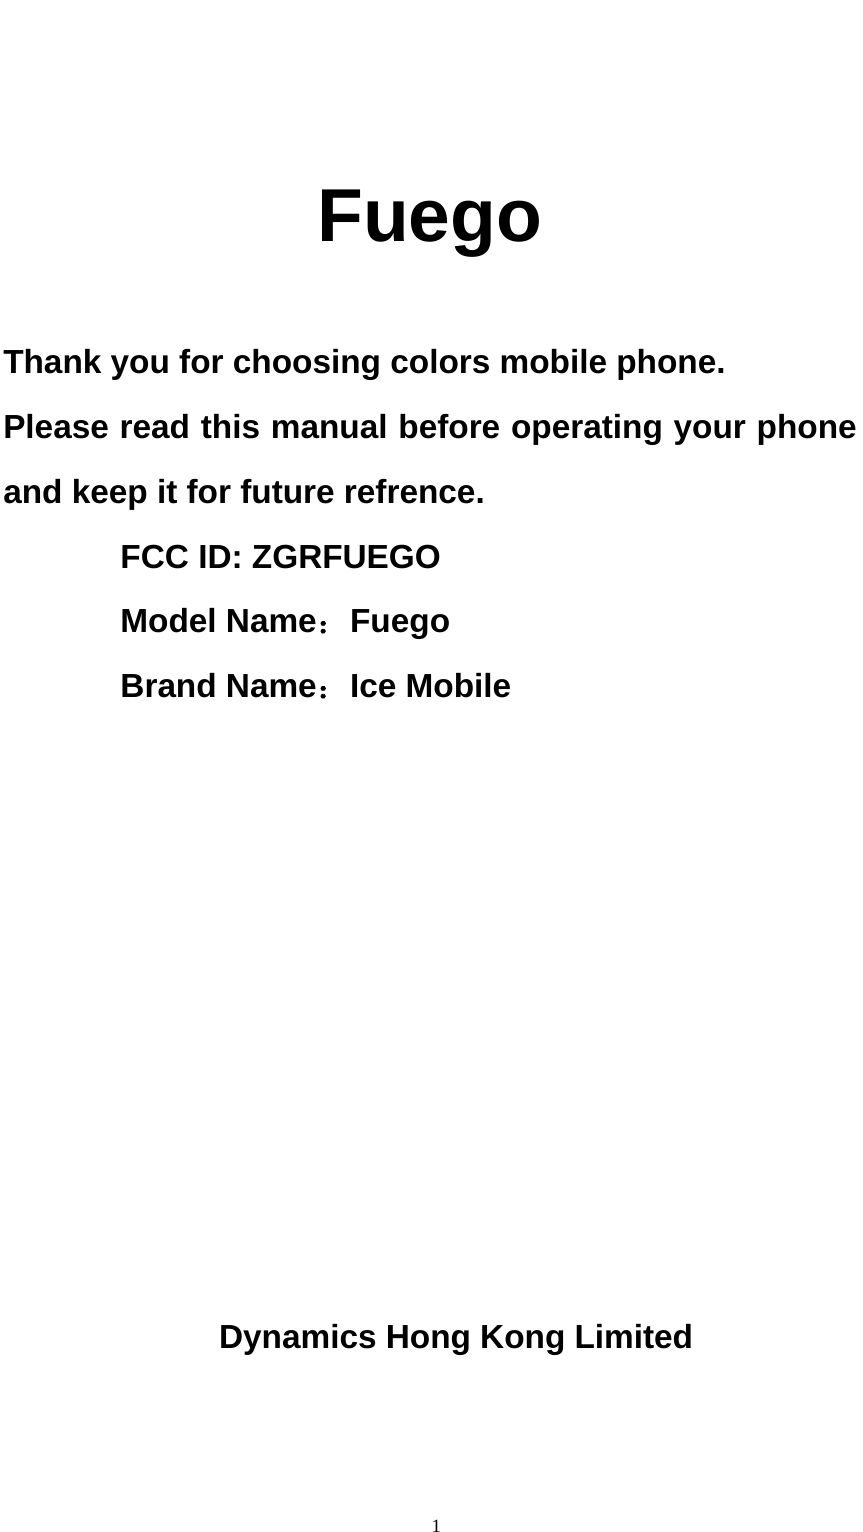                                                      1  Fuego  Thank you for choosing colors mobile phone. Please read this manual before operating your phone and keep it for future refrence.        FCC ID: ZGRFUEGO        Model Name：Fuego        Brand Name：Ice Mobile          Dynamics Hong Kong Limited   